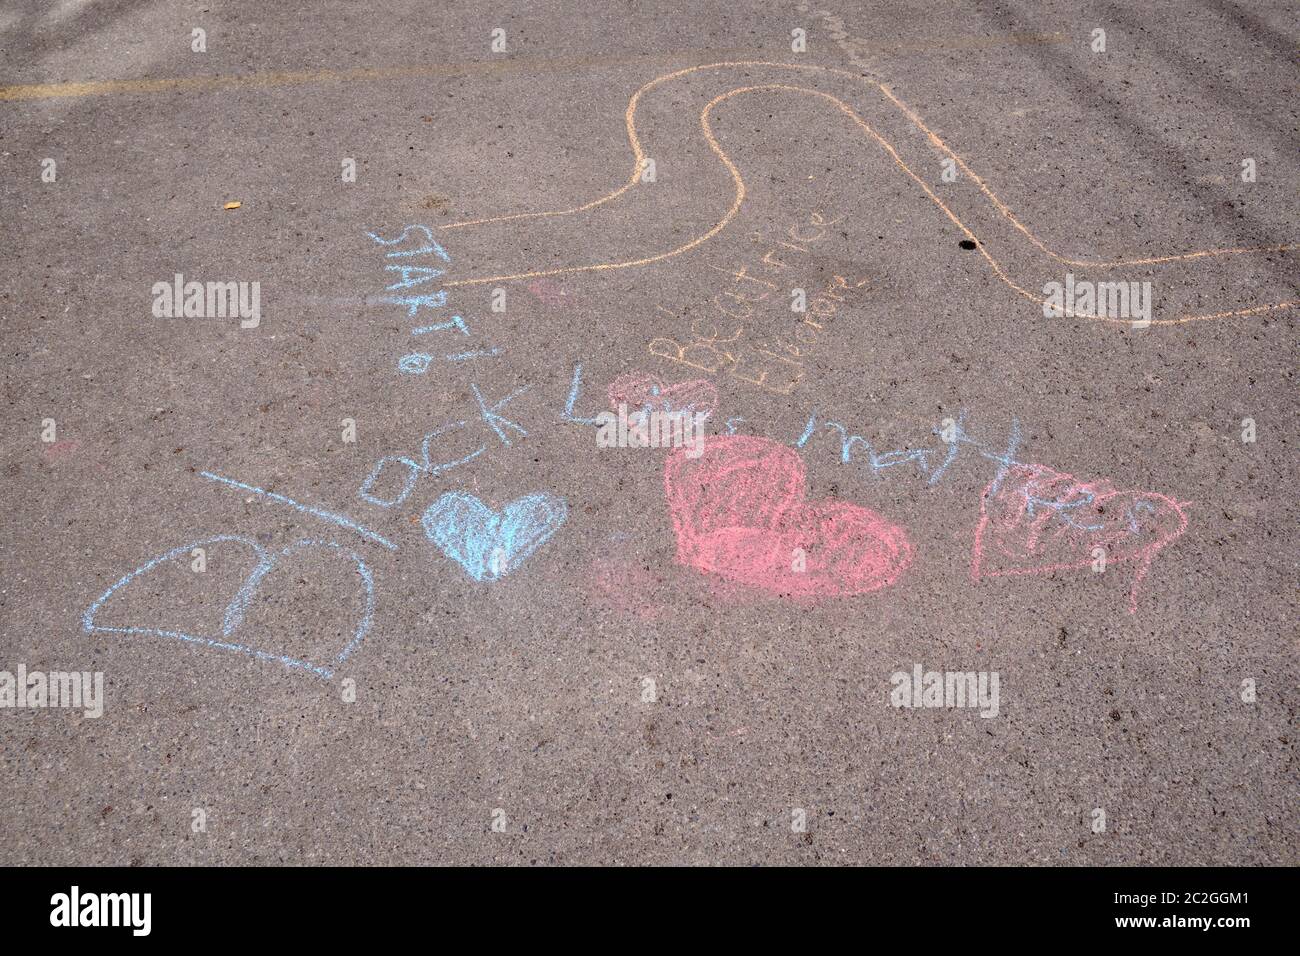 Black Lives Matter with hearts written in Chalk on a sidewalk in The Glebe area of Ottawa, Canada Stock Photo